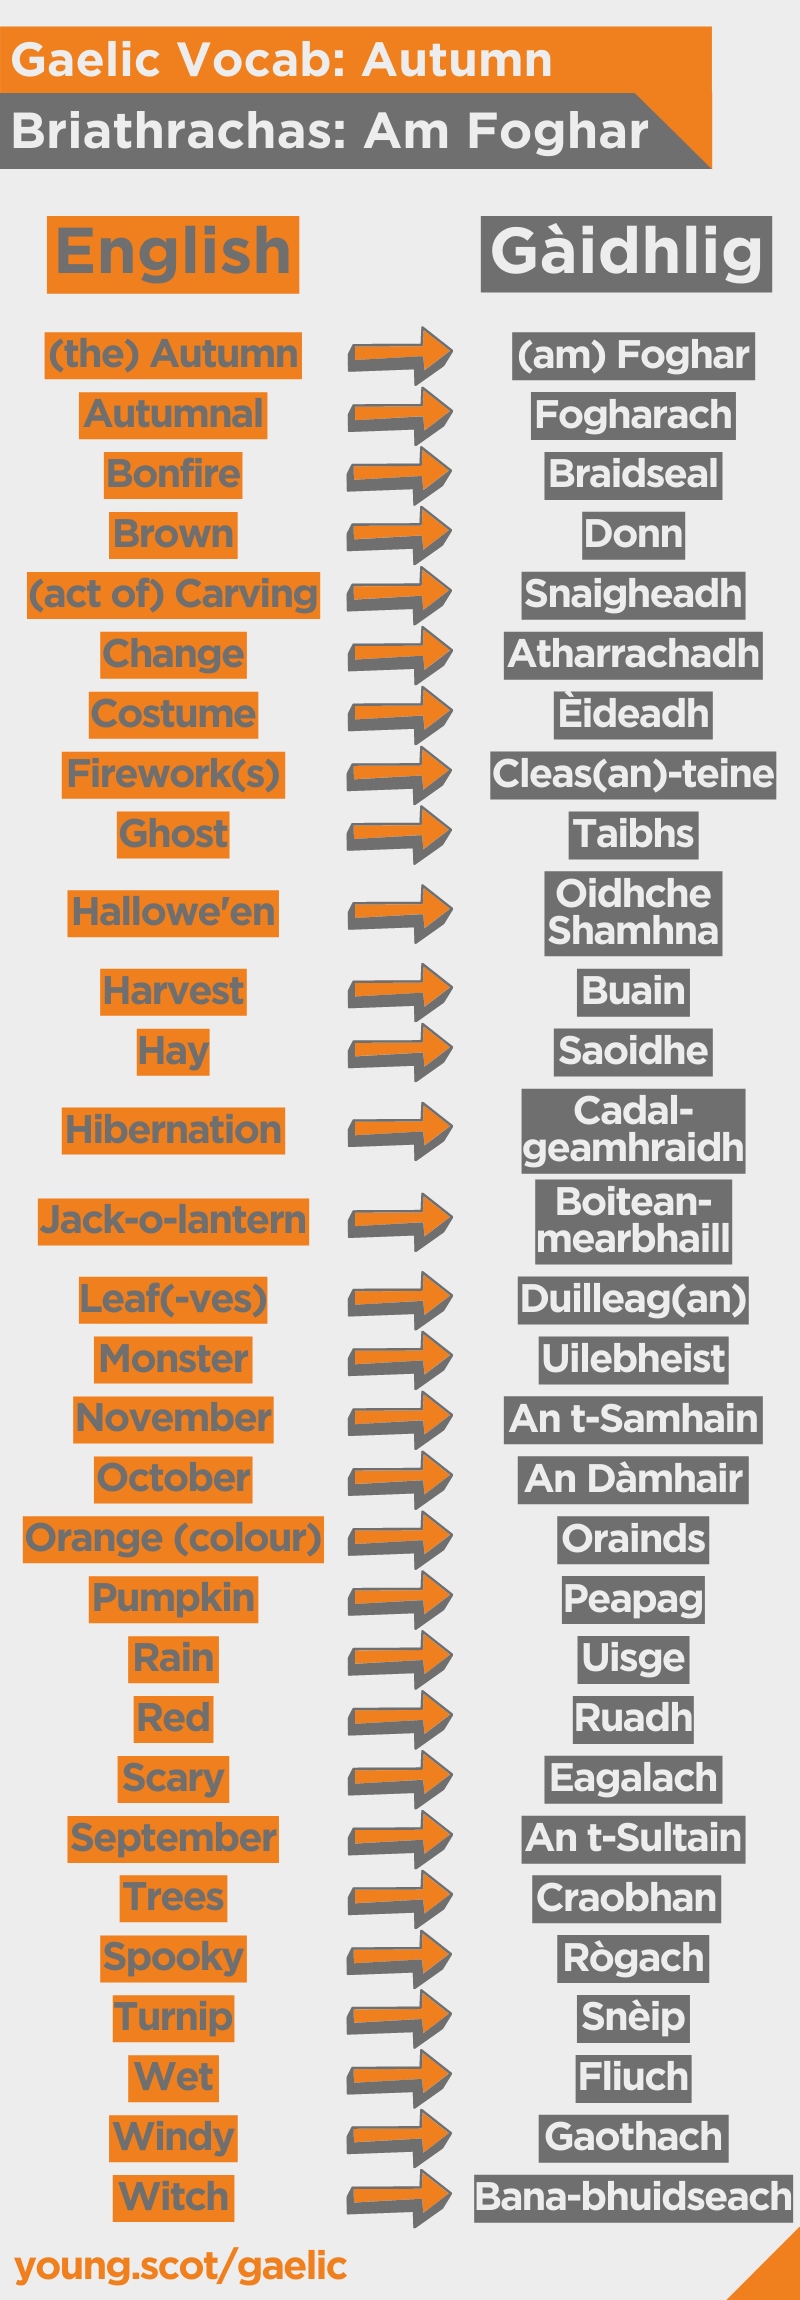 Vocab list of Autumnal Gaelic words - text version is available below.